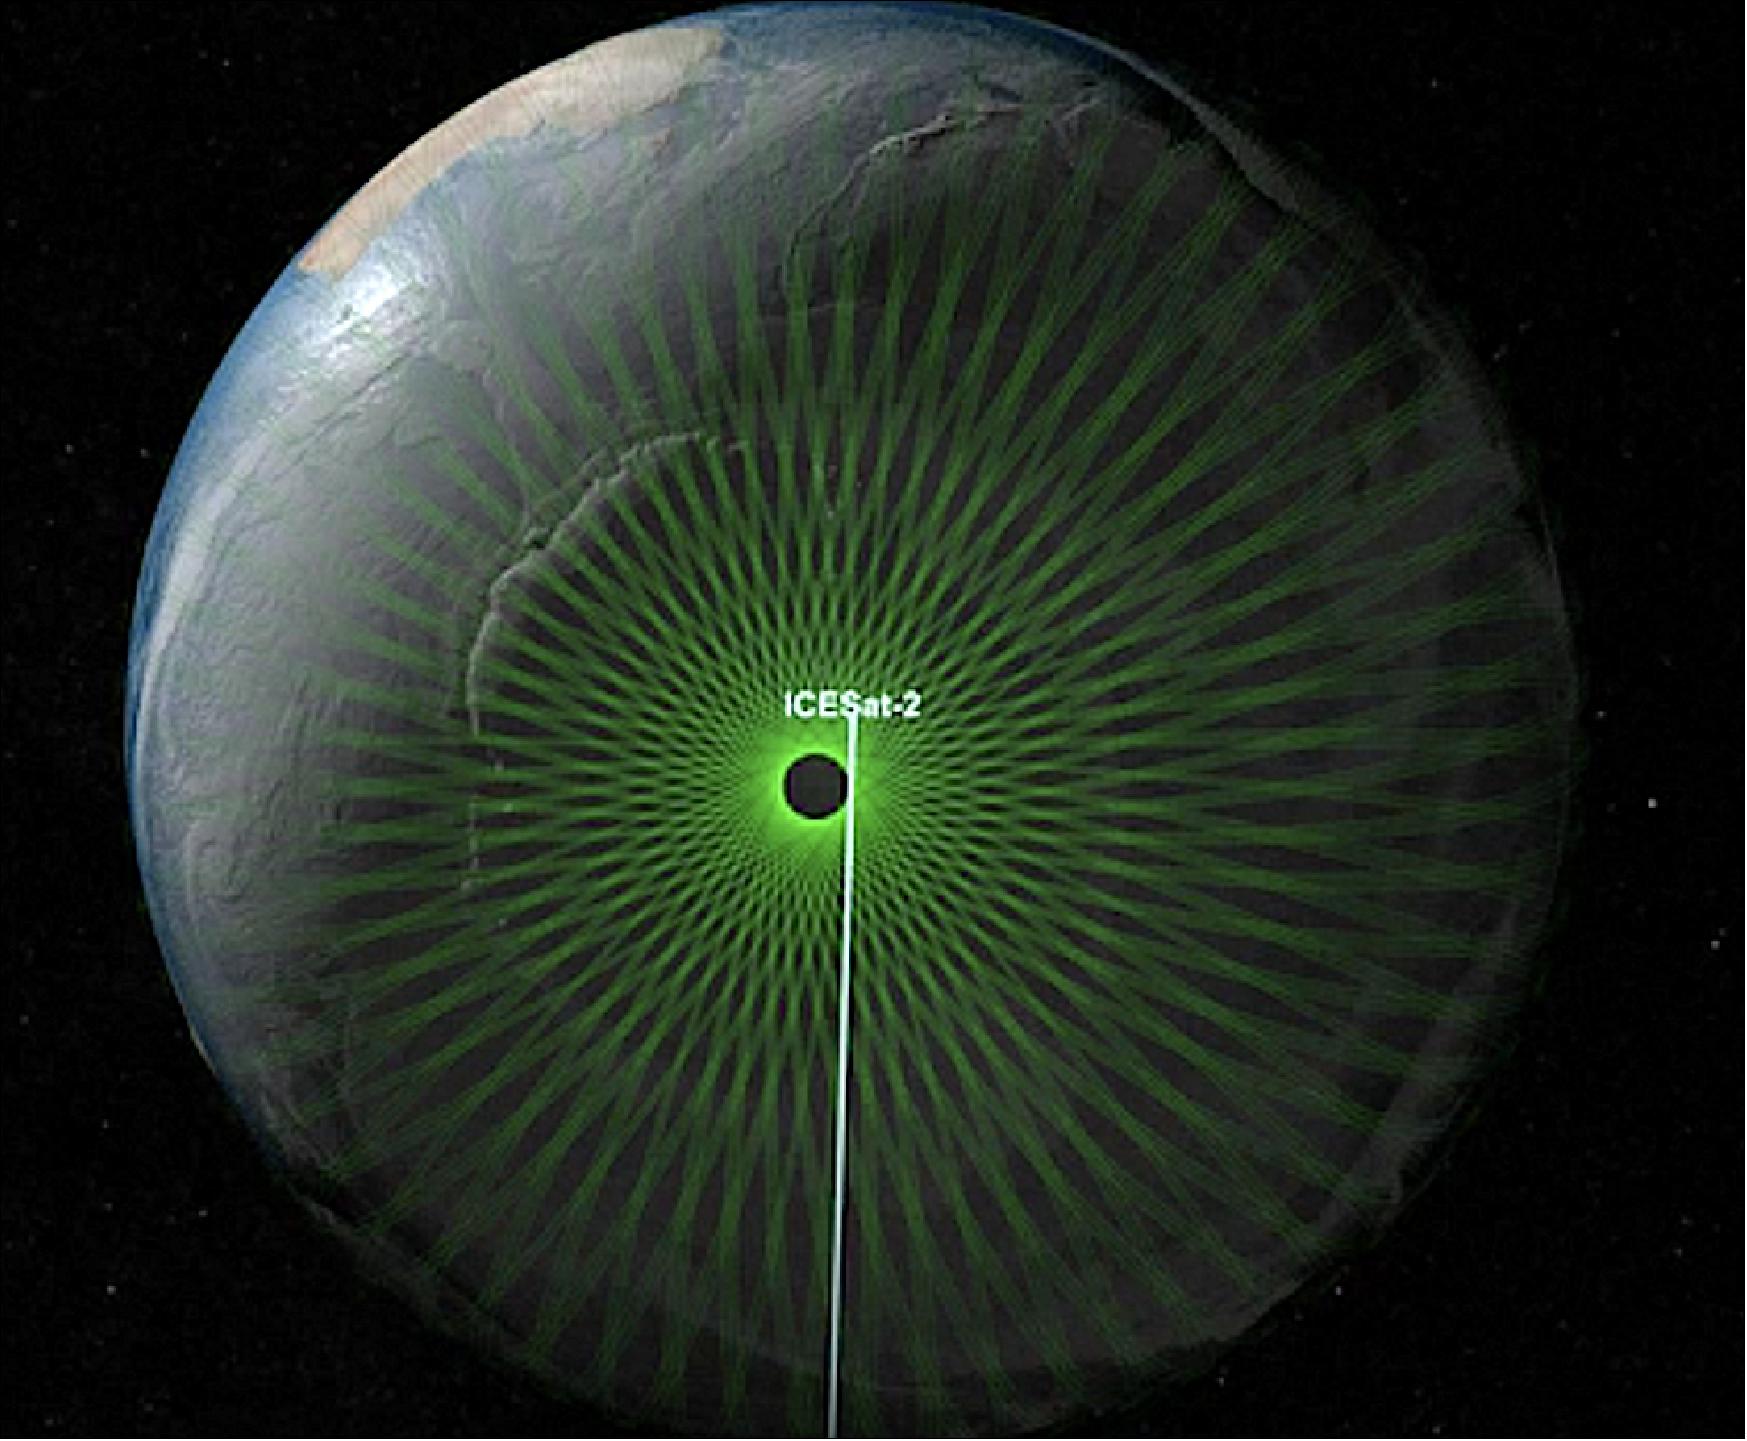 Figure 76: The traverse follows close to the 88 degree south line, where all the orbits will converge, as seen in this visualization. This allows scientists to compare thousands of survey measurements with data collected by ICESat-2 once it is in orbit (image credit: NASA's Scientific Visualization Studio)